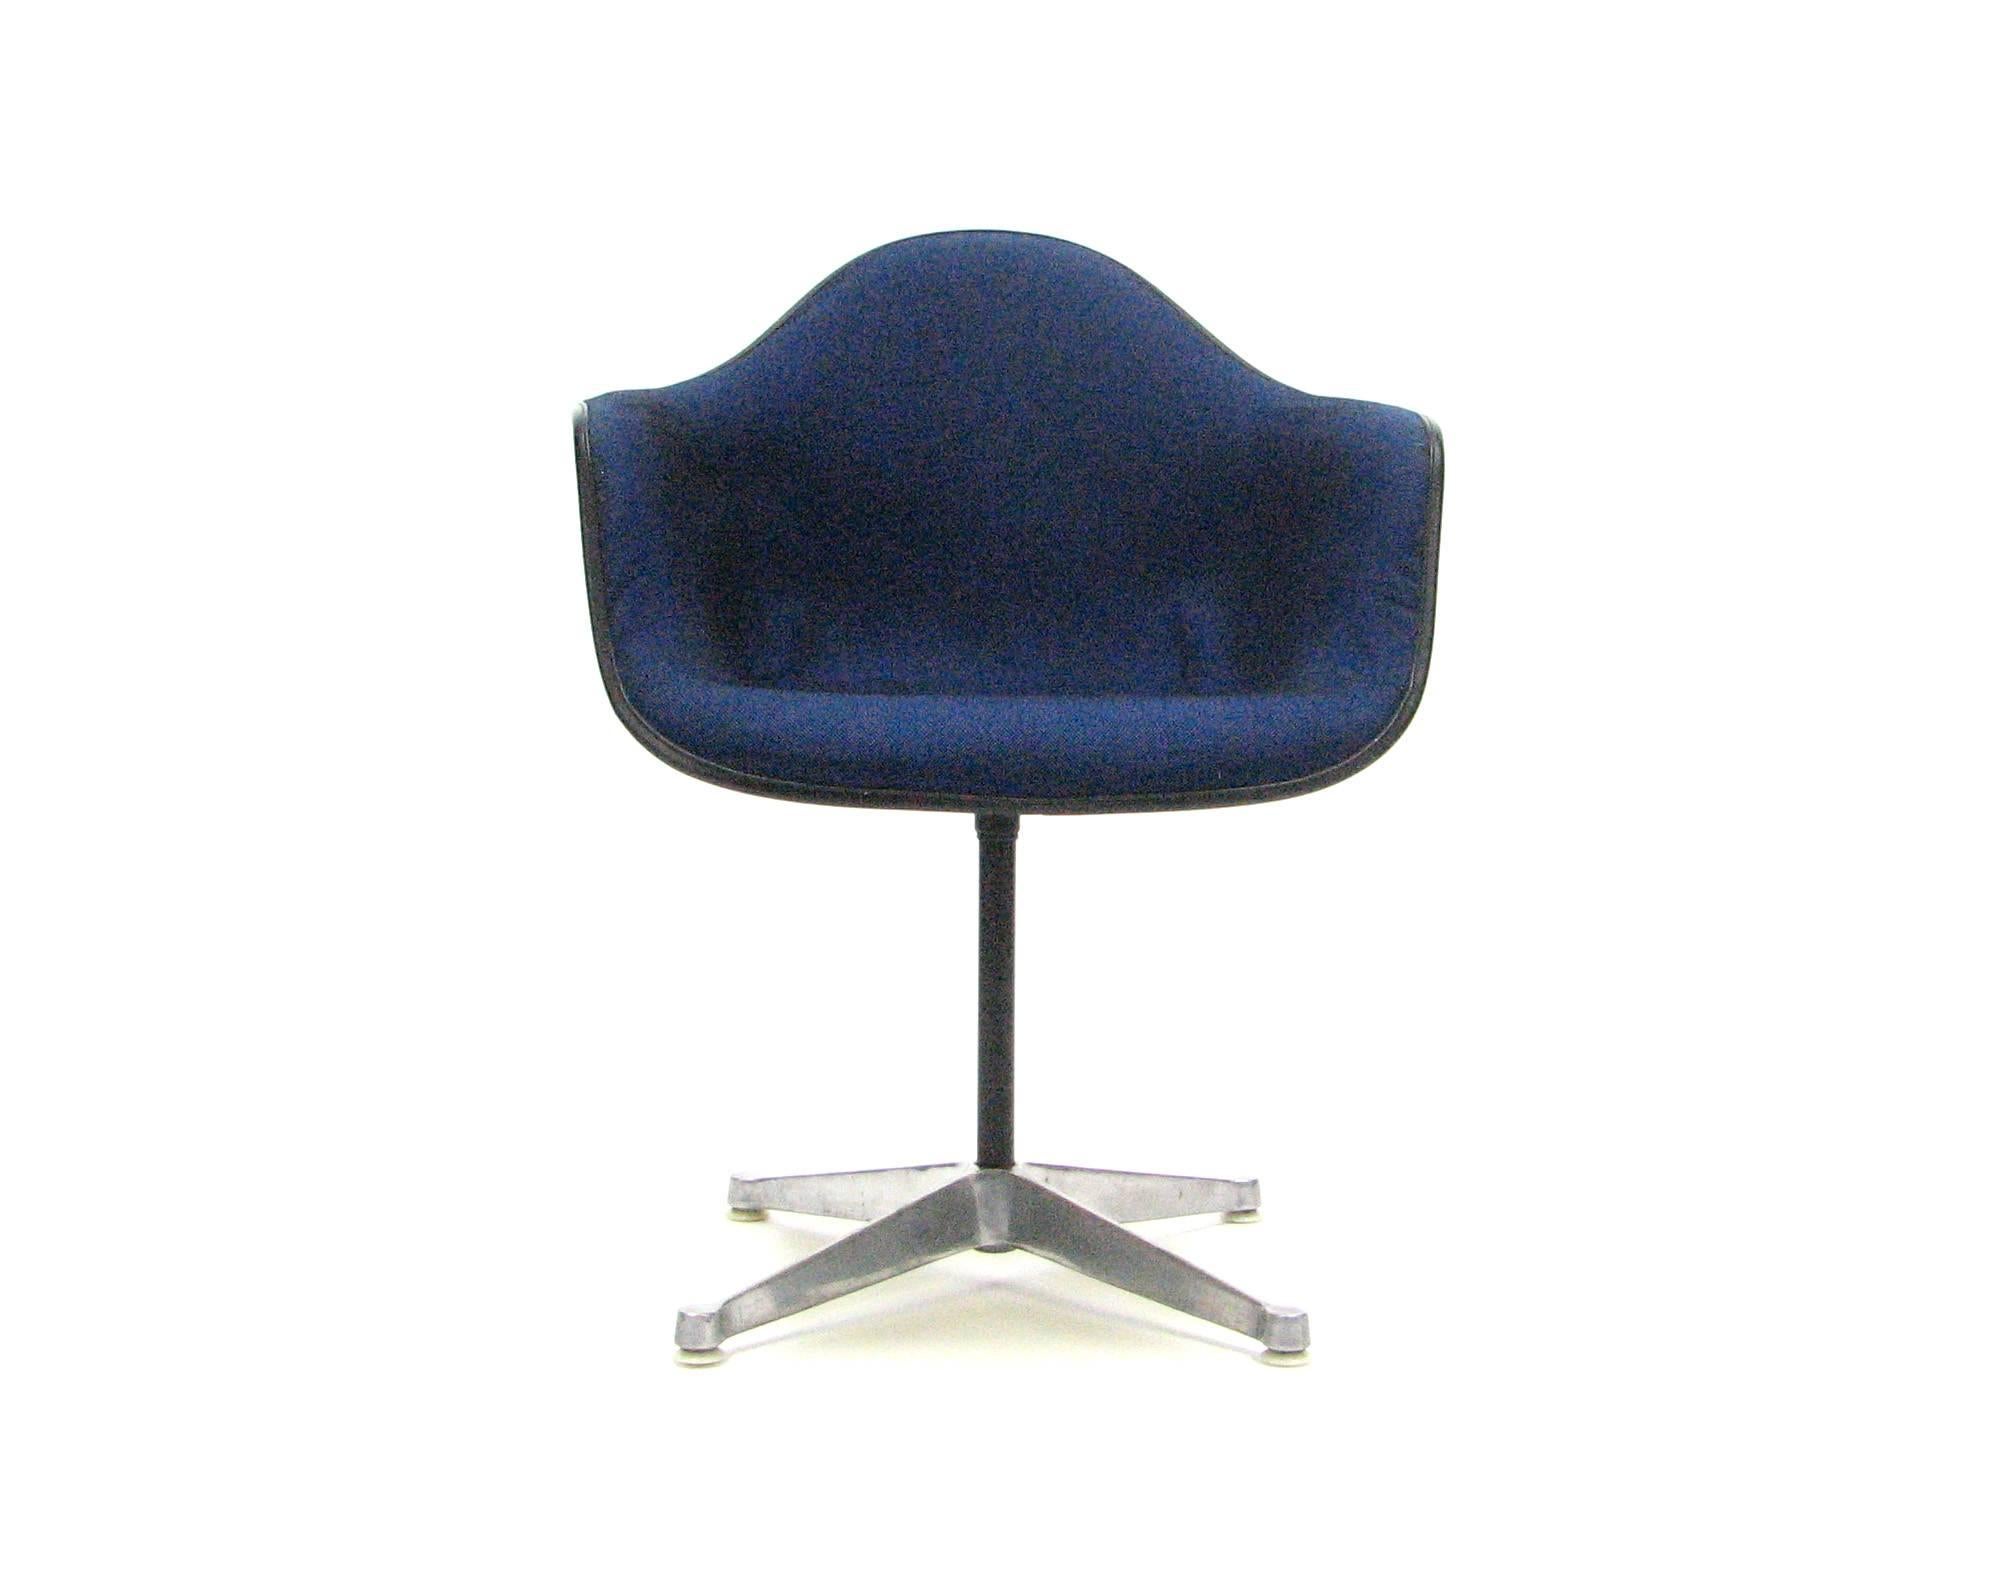 Striking, cheerful and iconic, this bright yellow molded fiberglass swivel armchair by Charles and Ray Eames for Herman Miller is upholstered in original heathered royal blue and black hopsack by Alexander Girard, early 1970s.

The fabric on